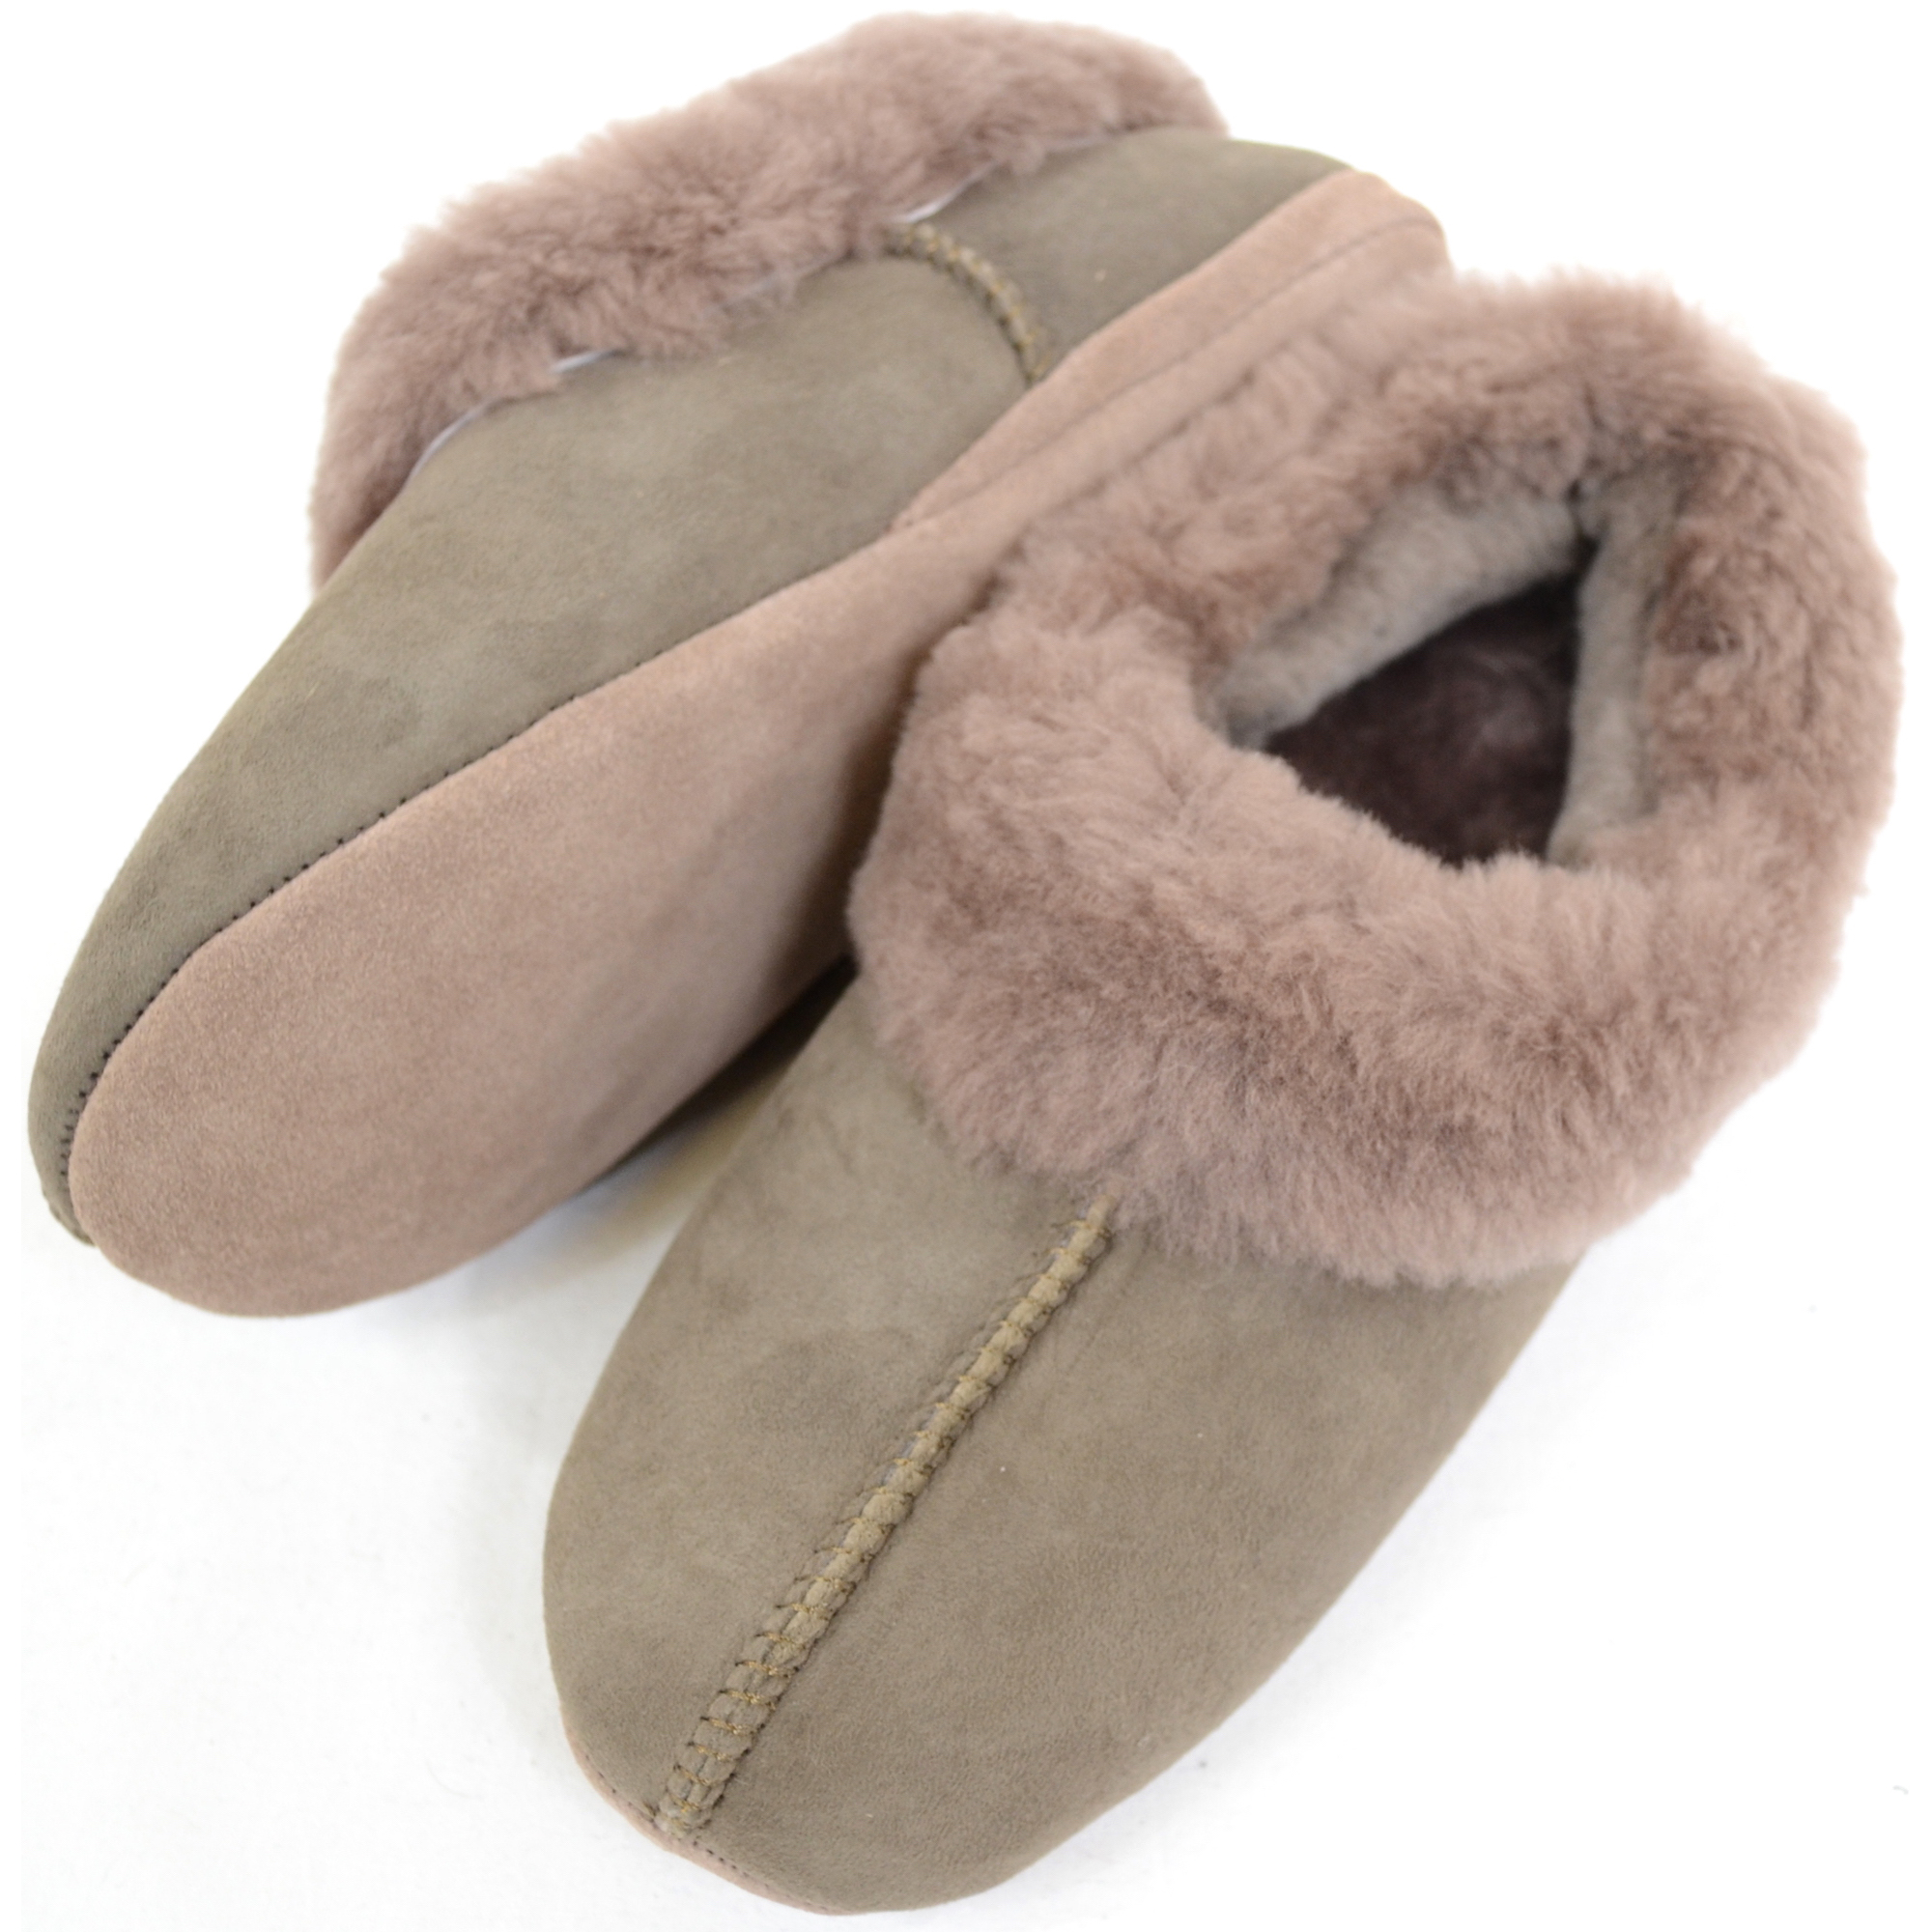 Ladies Sheepskin Moccasin Slipper with Safety Sole - Atlantic Shore